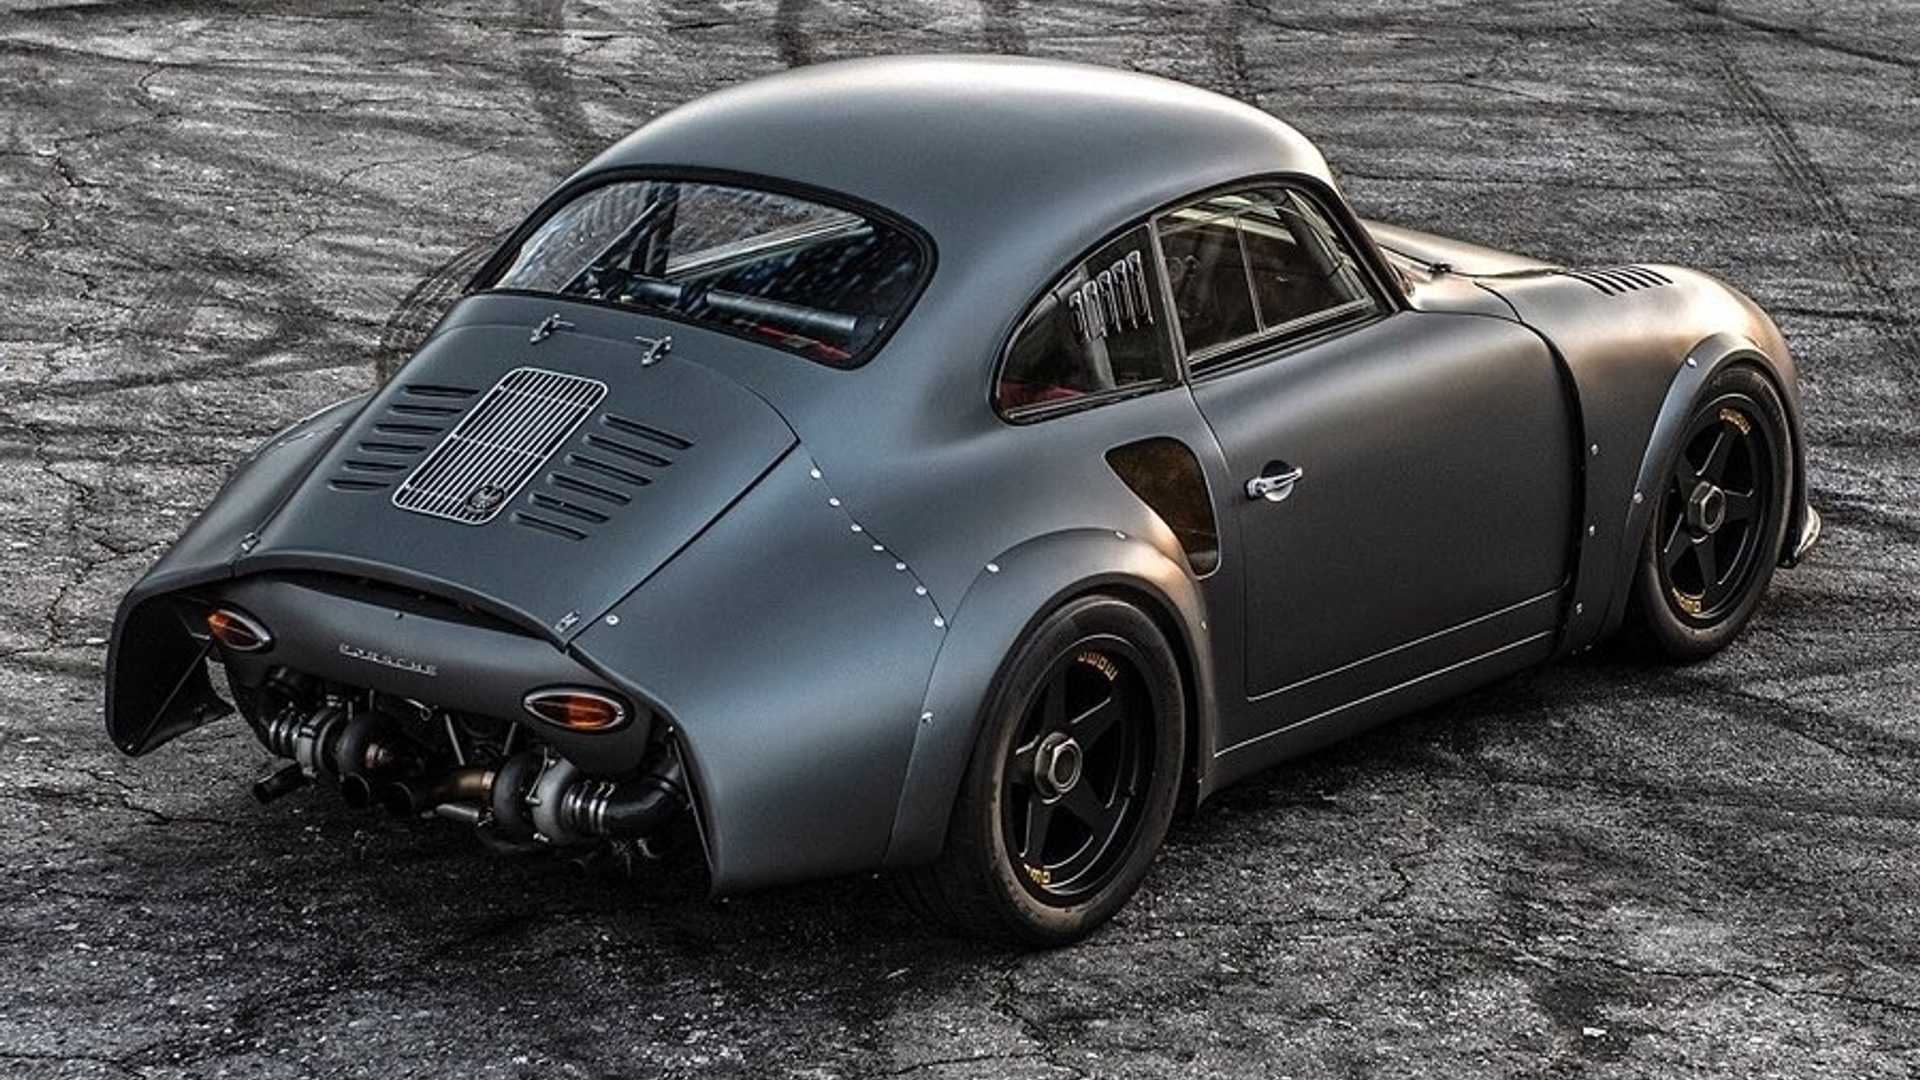 The 1960 Porsche 356 RSR from Emory Motorsport